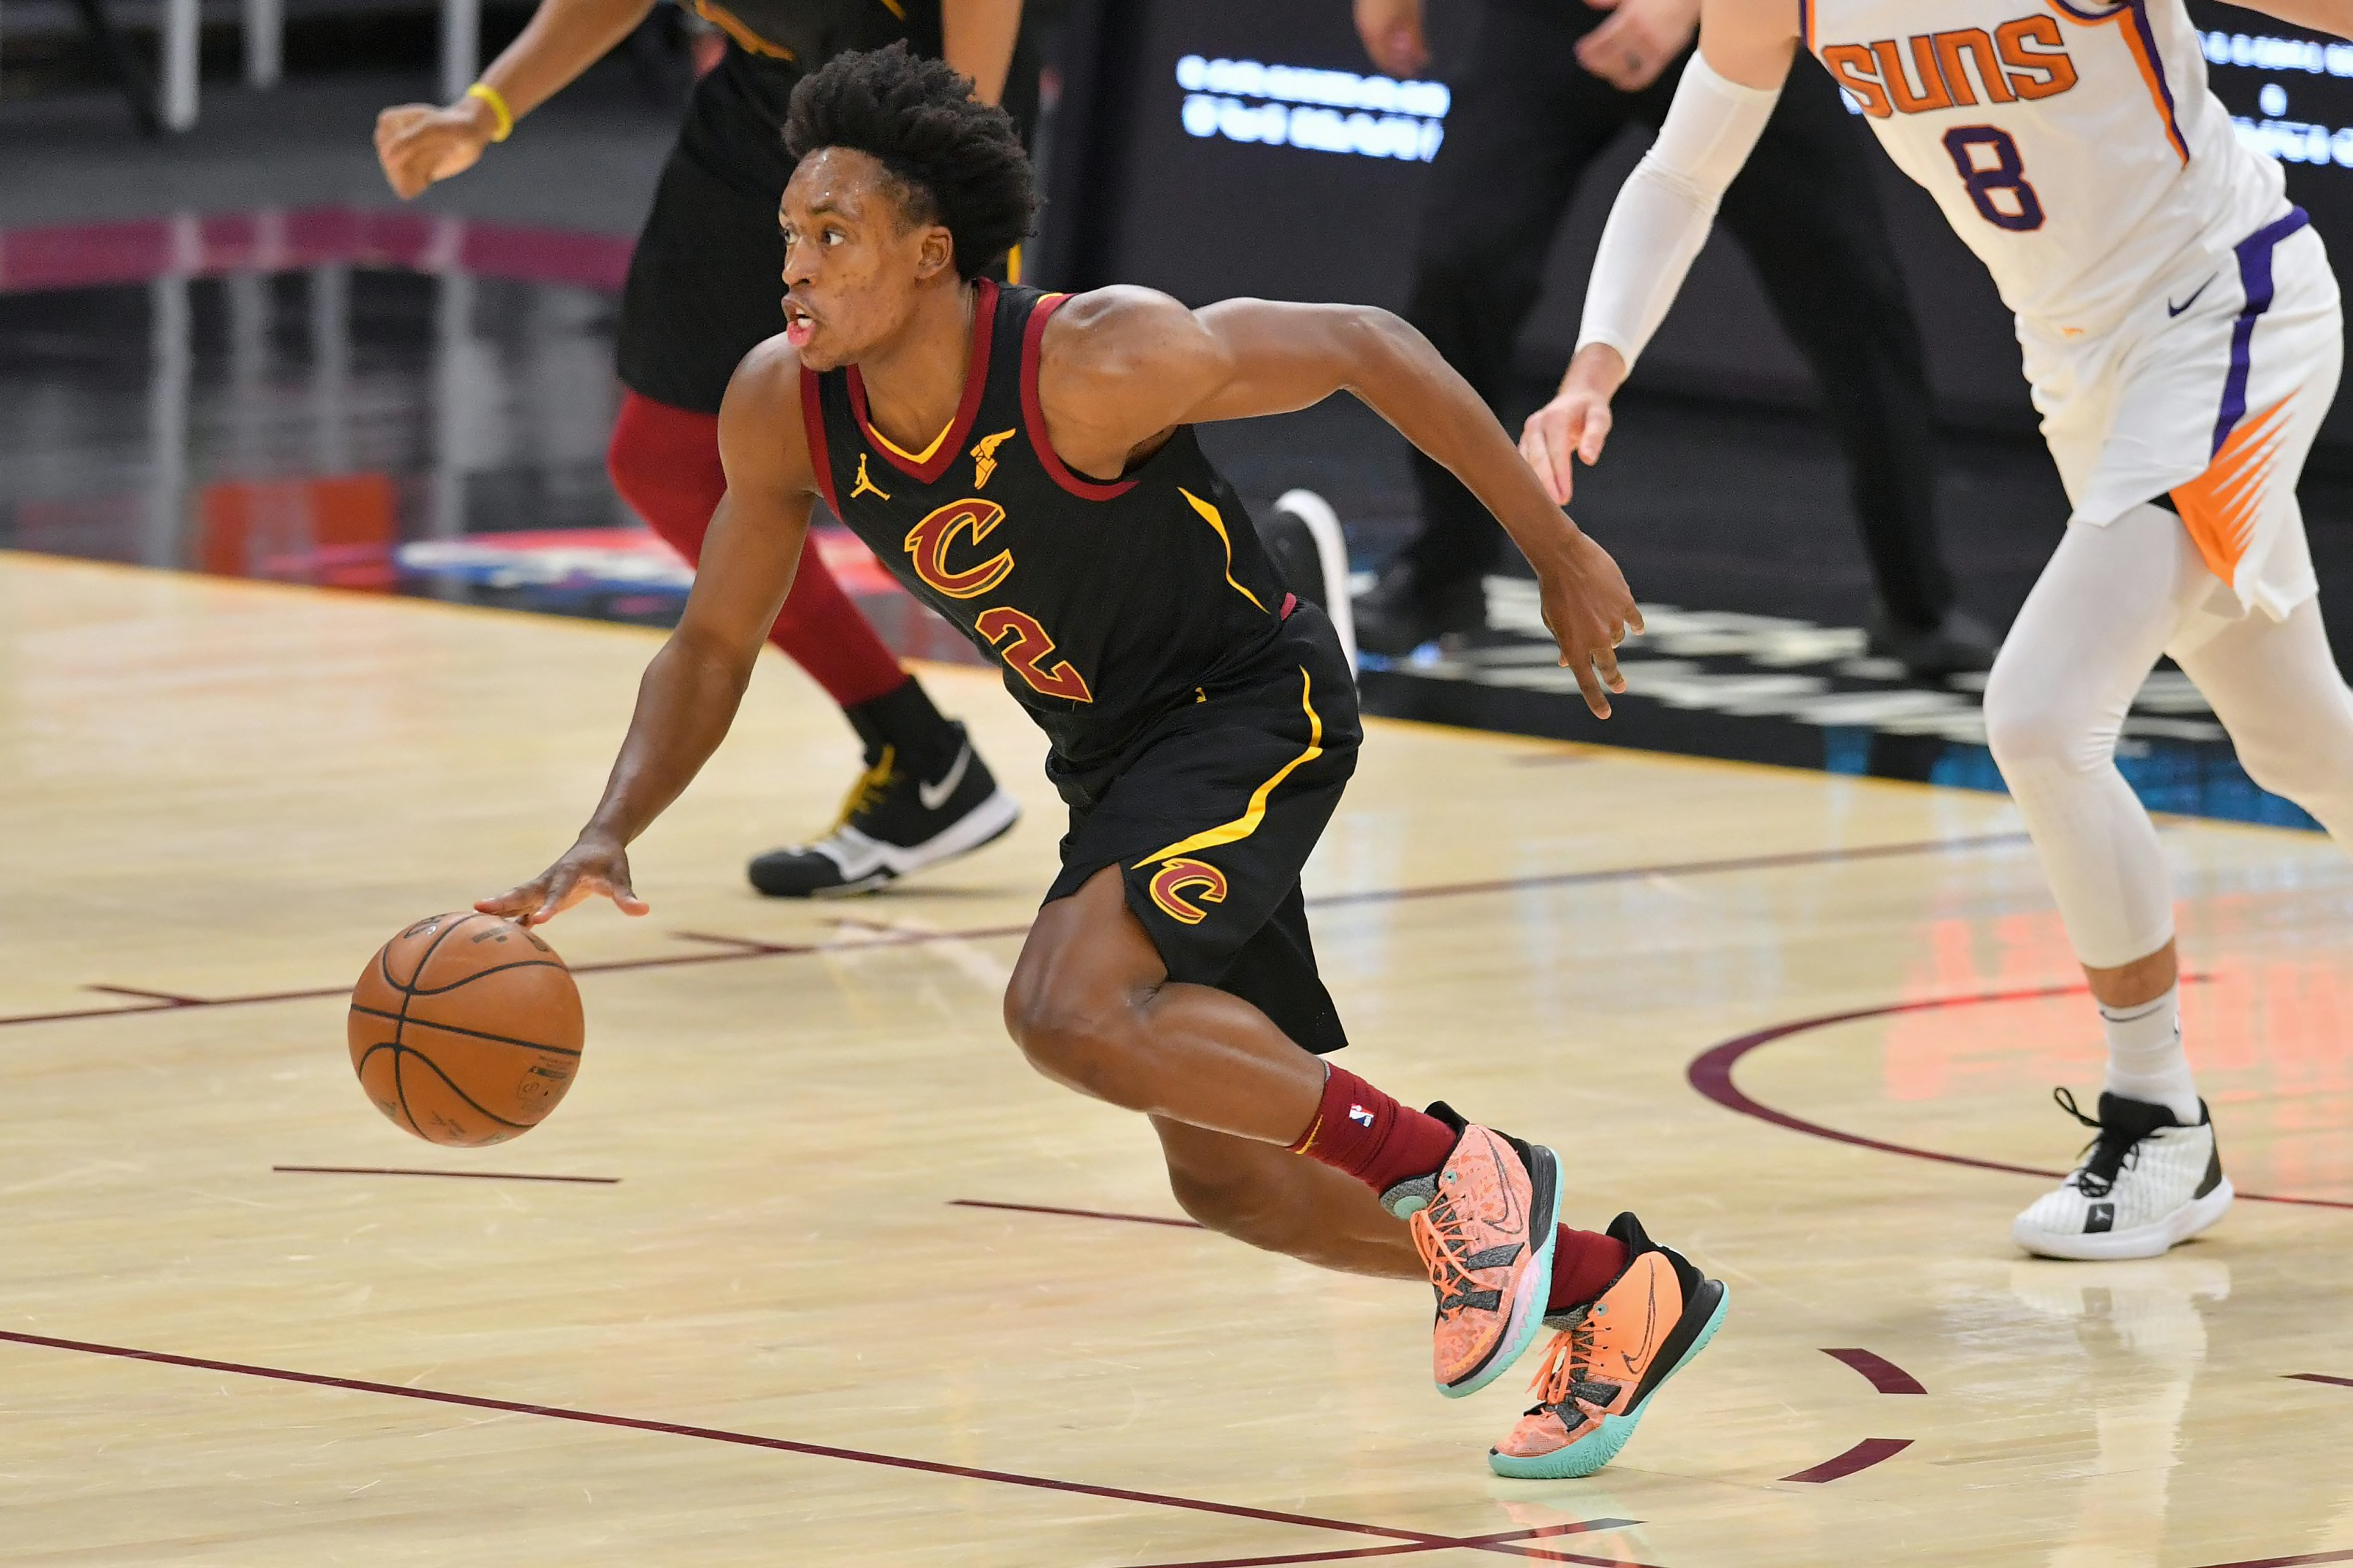 Cavs' Collin Sexton takes on Kyrie Irving, Kevin Durant, James